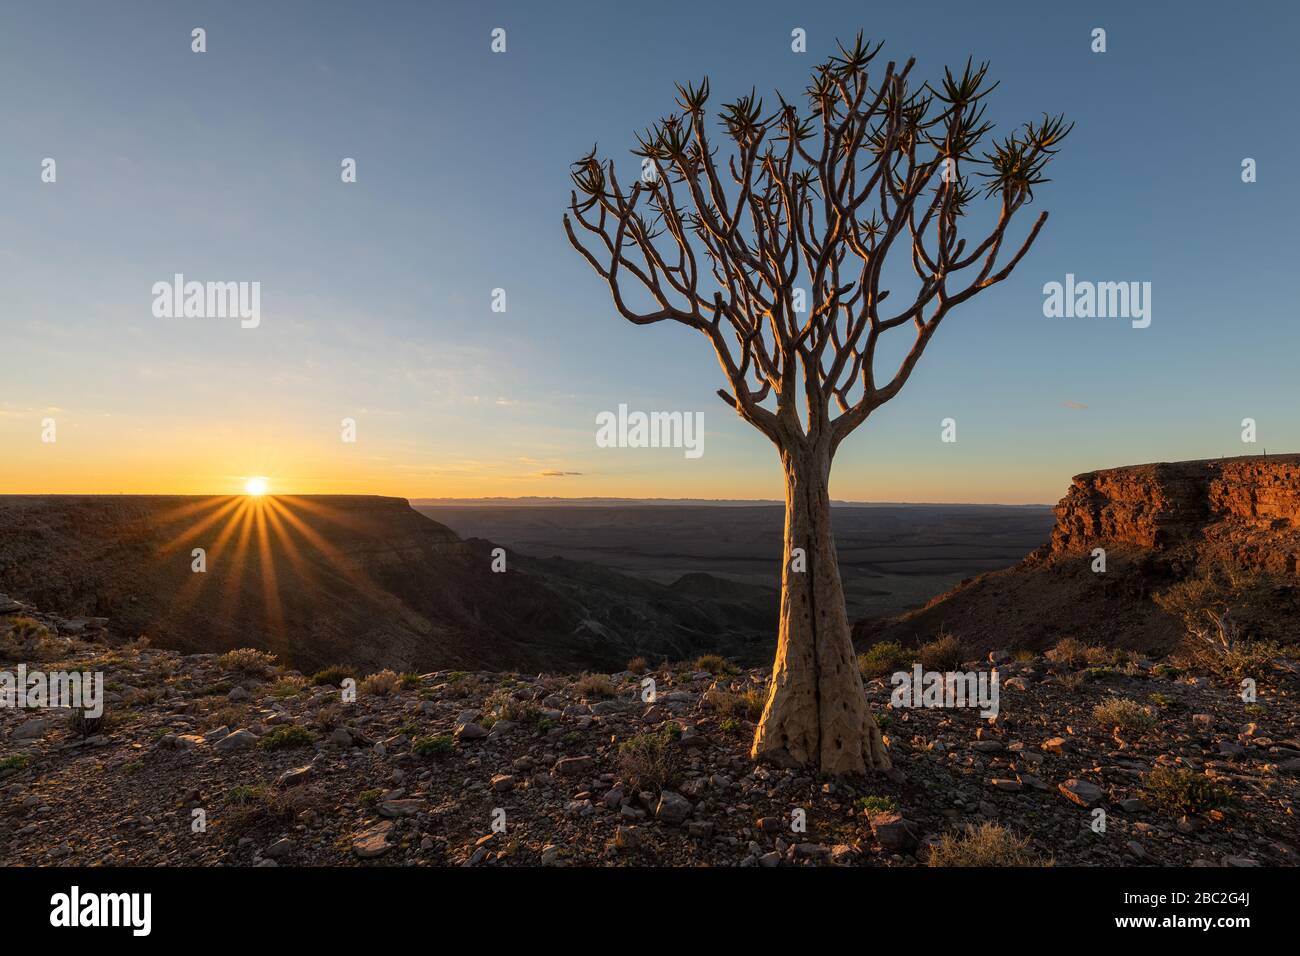 A moody sunrise landscape taken on top of the arid and stark Fish River Canyon, Namibia, with an ancient Quiver Tree in the foreground, and a golden s Stock Photo